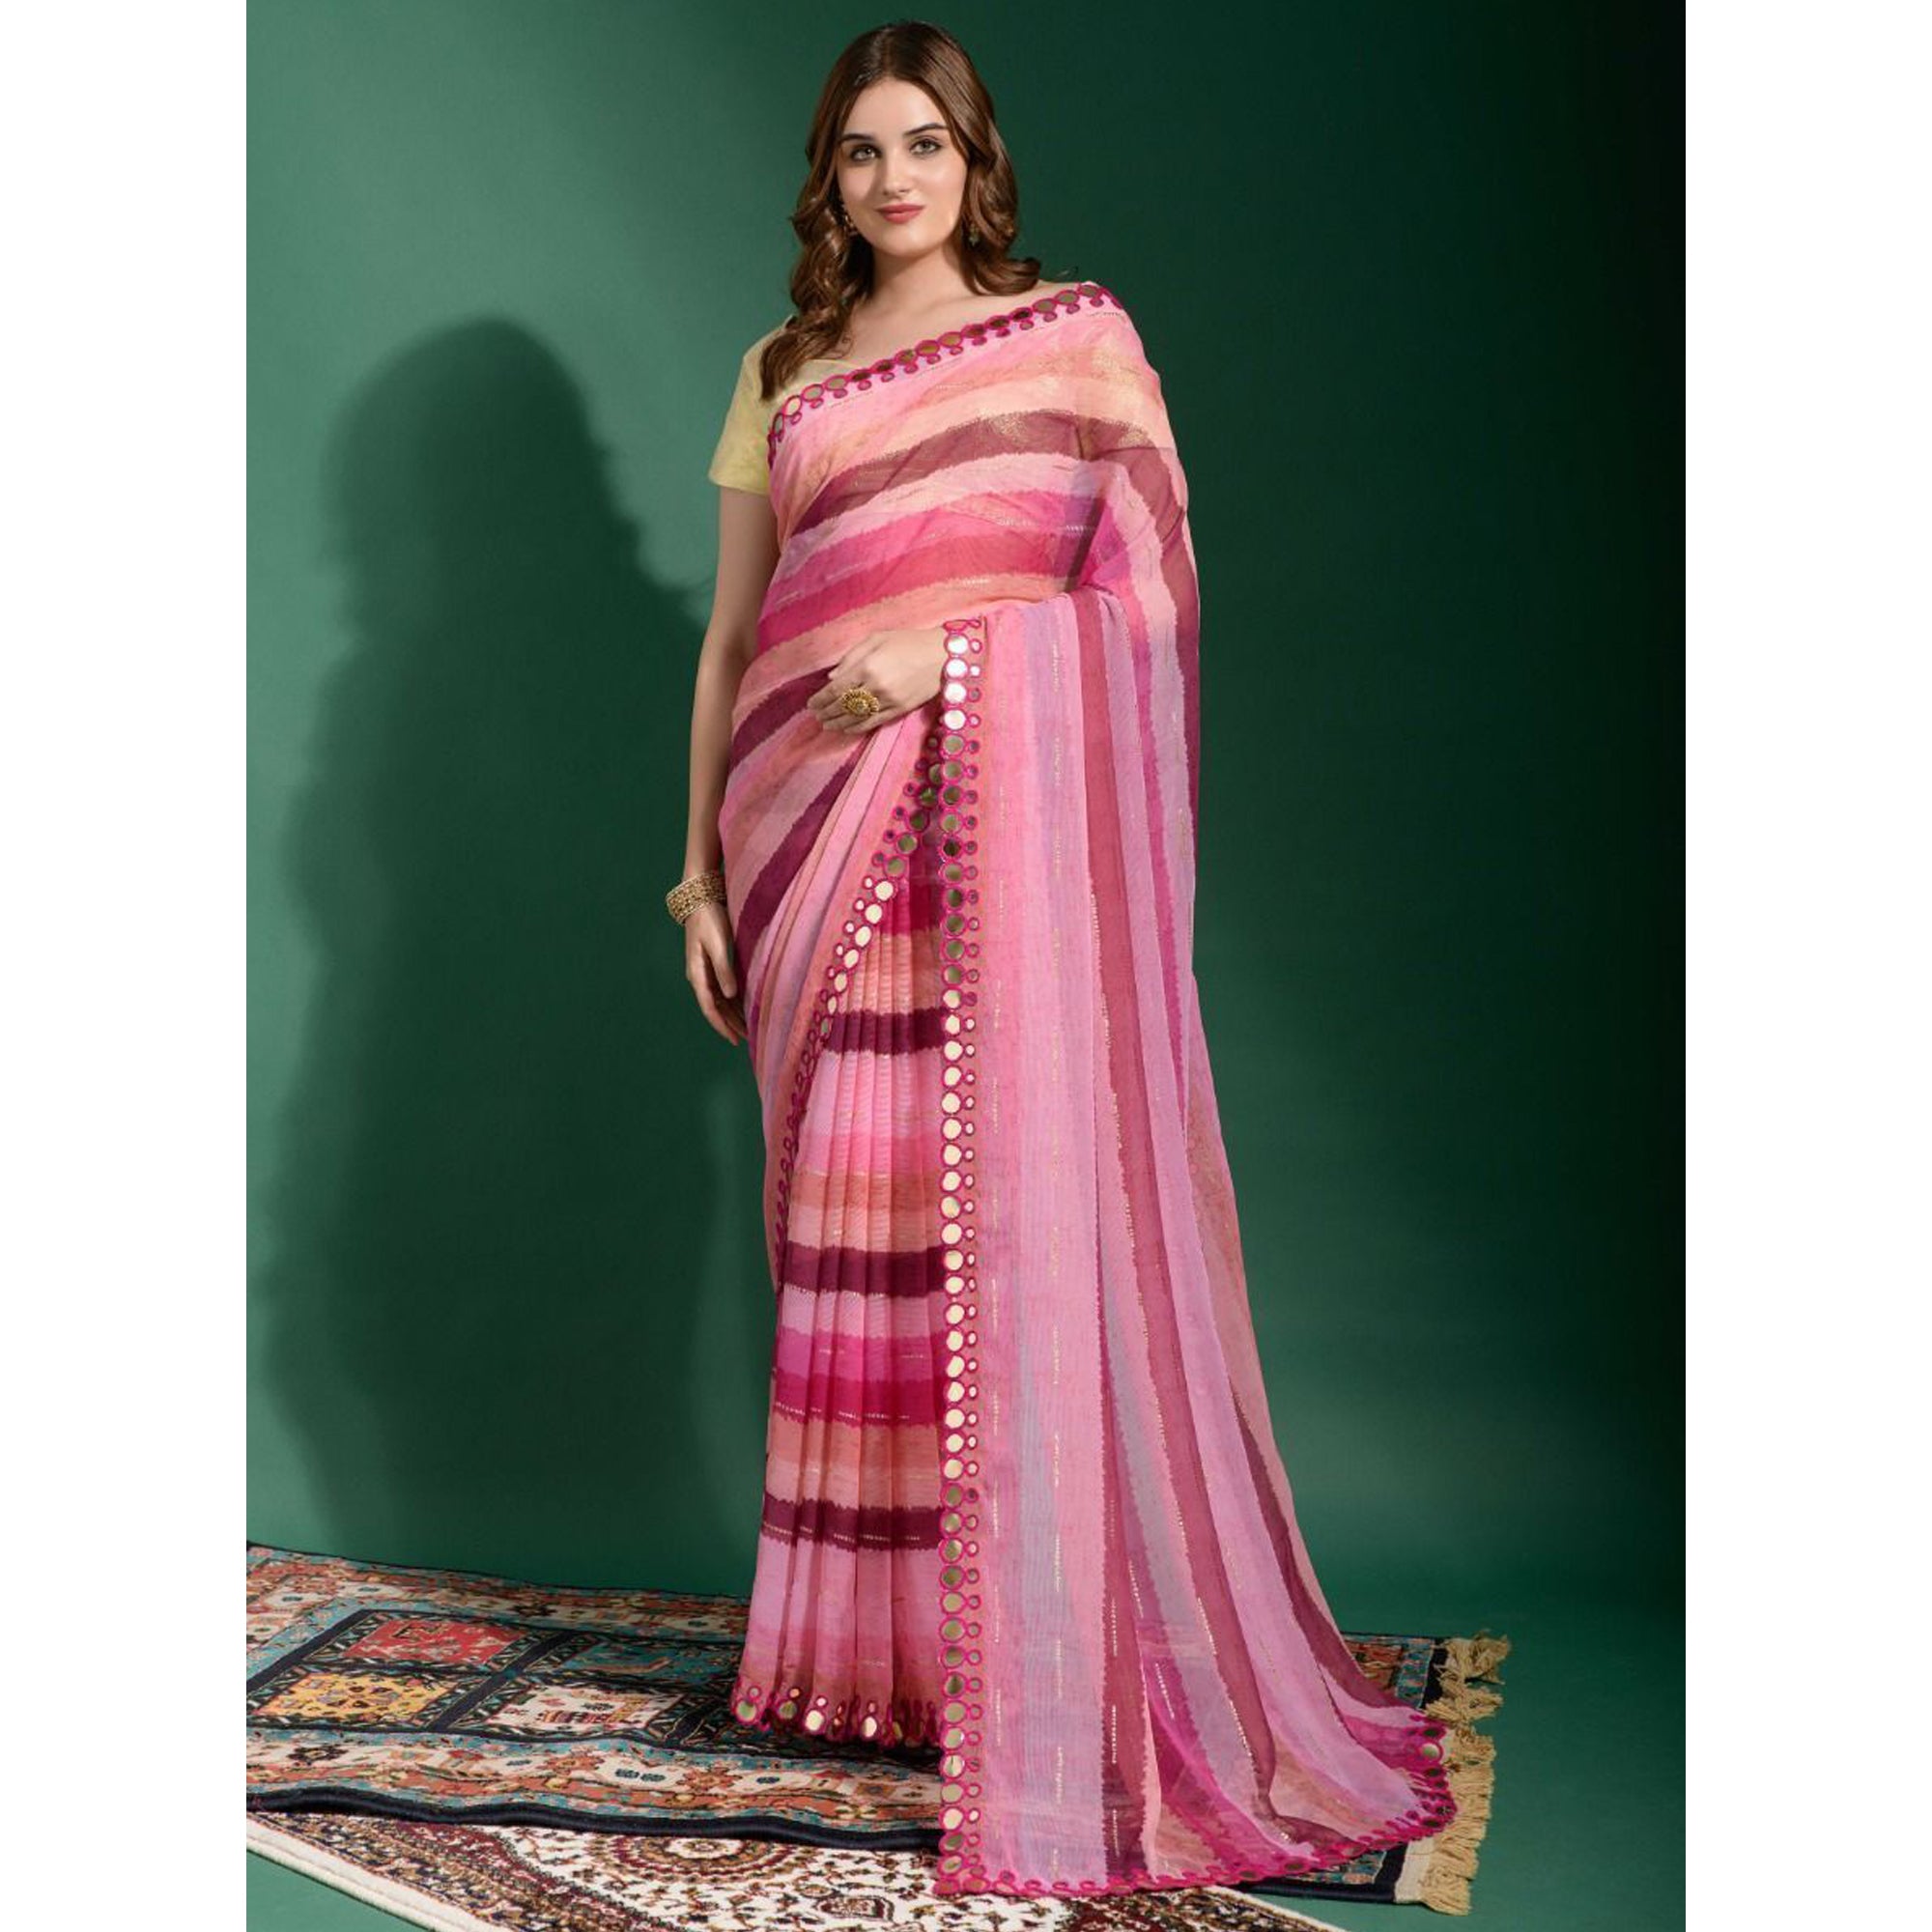 Ready To Wear Pink Printed Color Designer Indian Wedding Saree